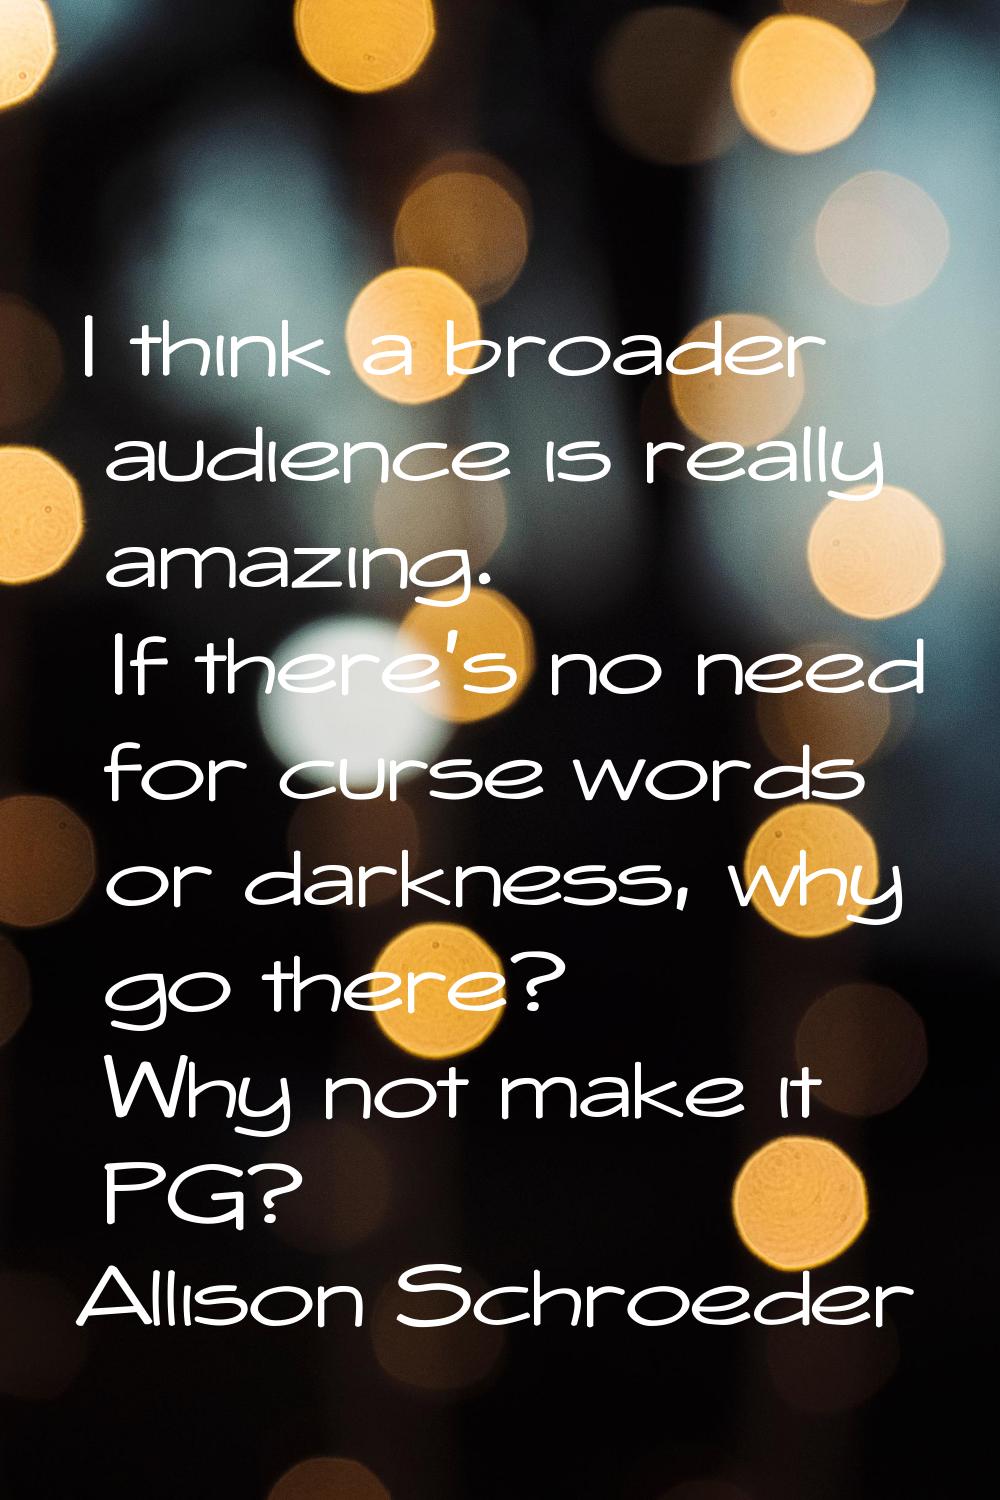 I think a broader audience is really amazing. If there's no need for curse words or darkness, why g